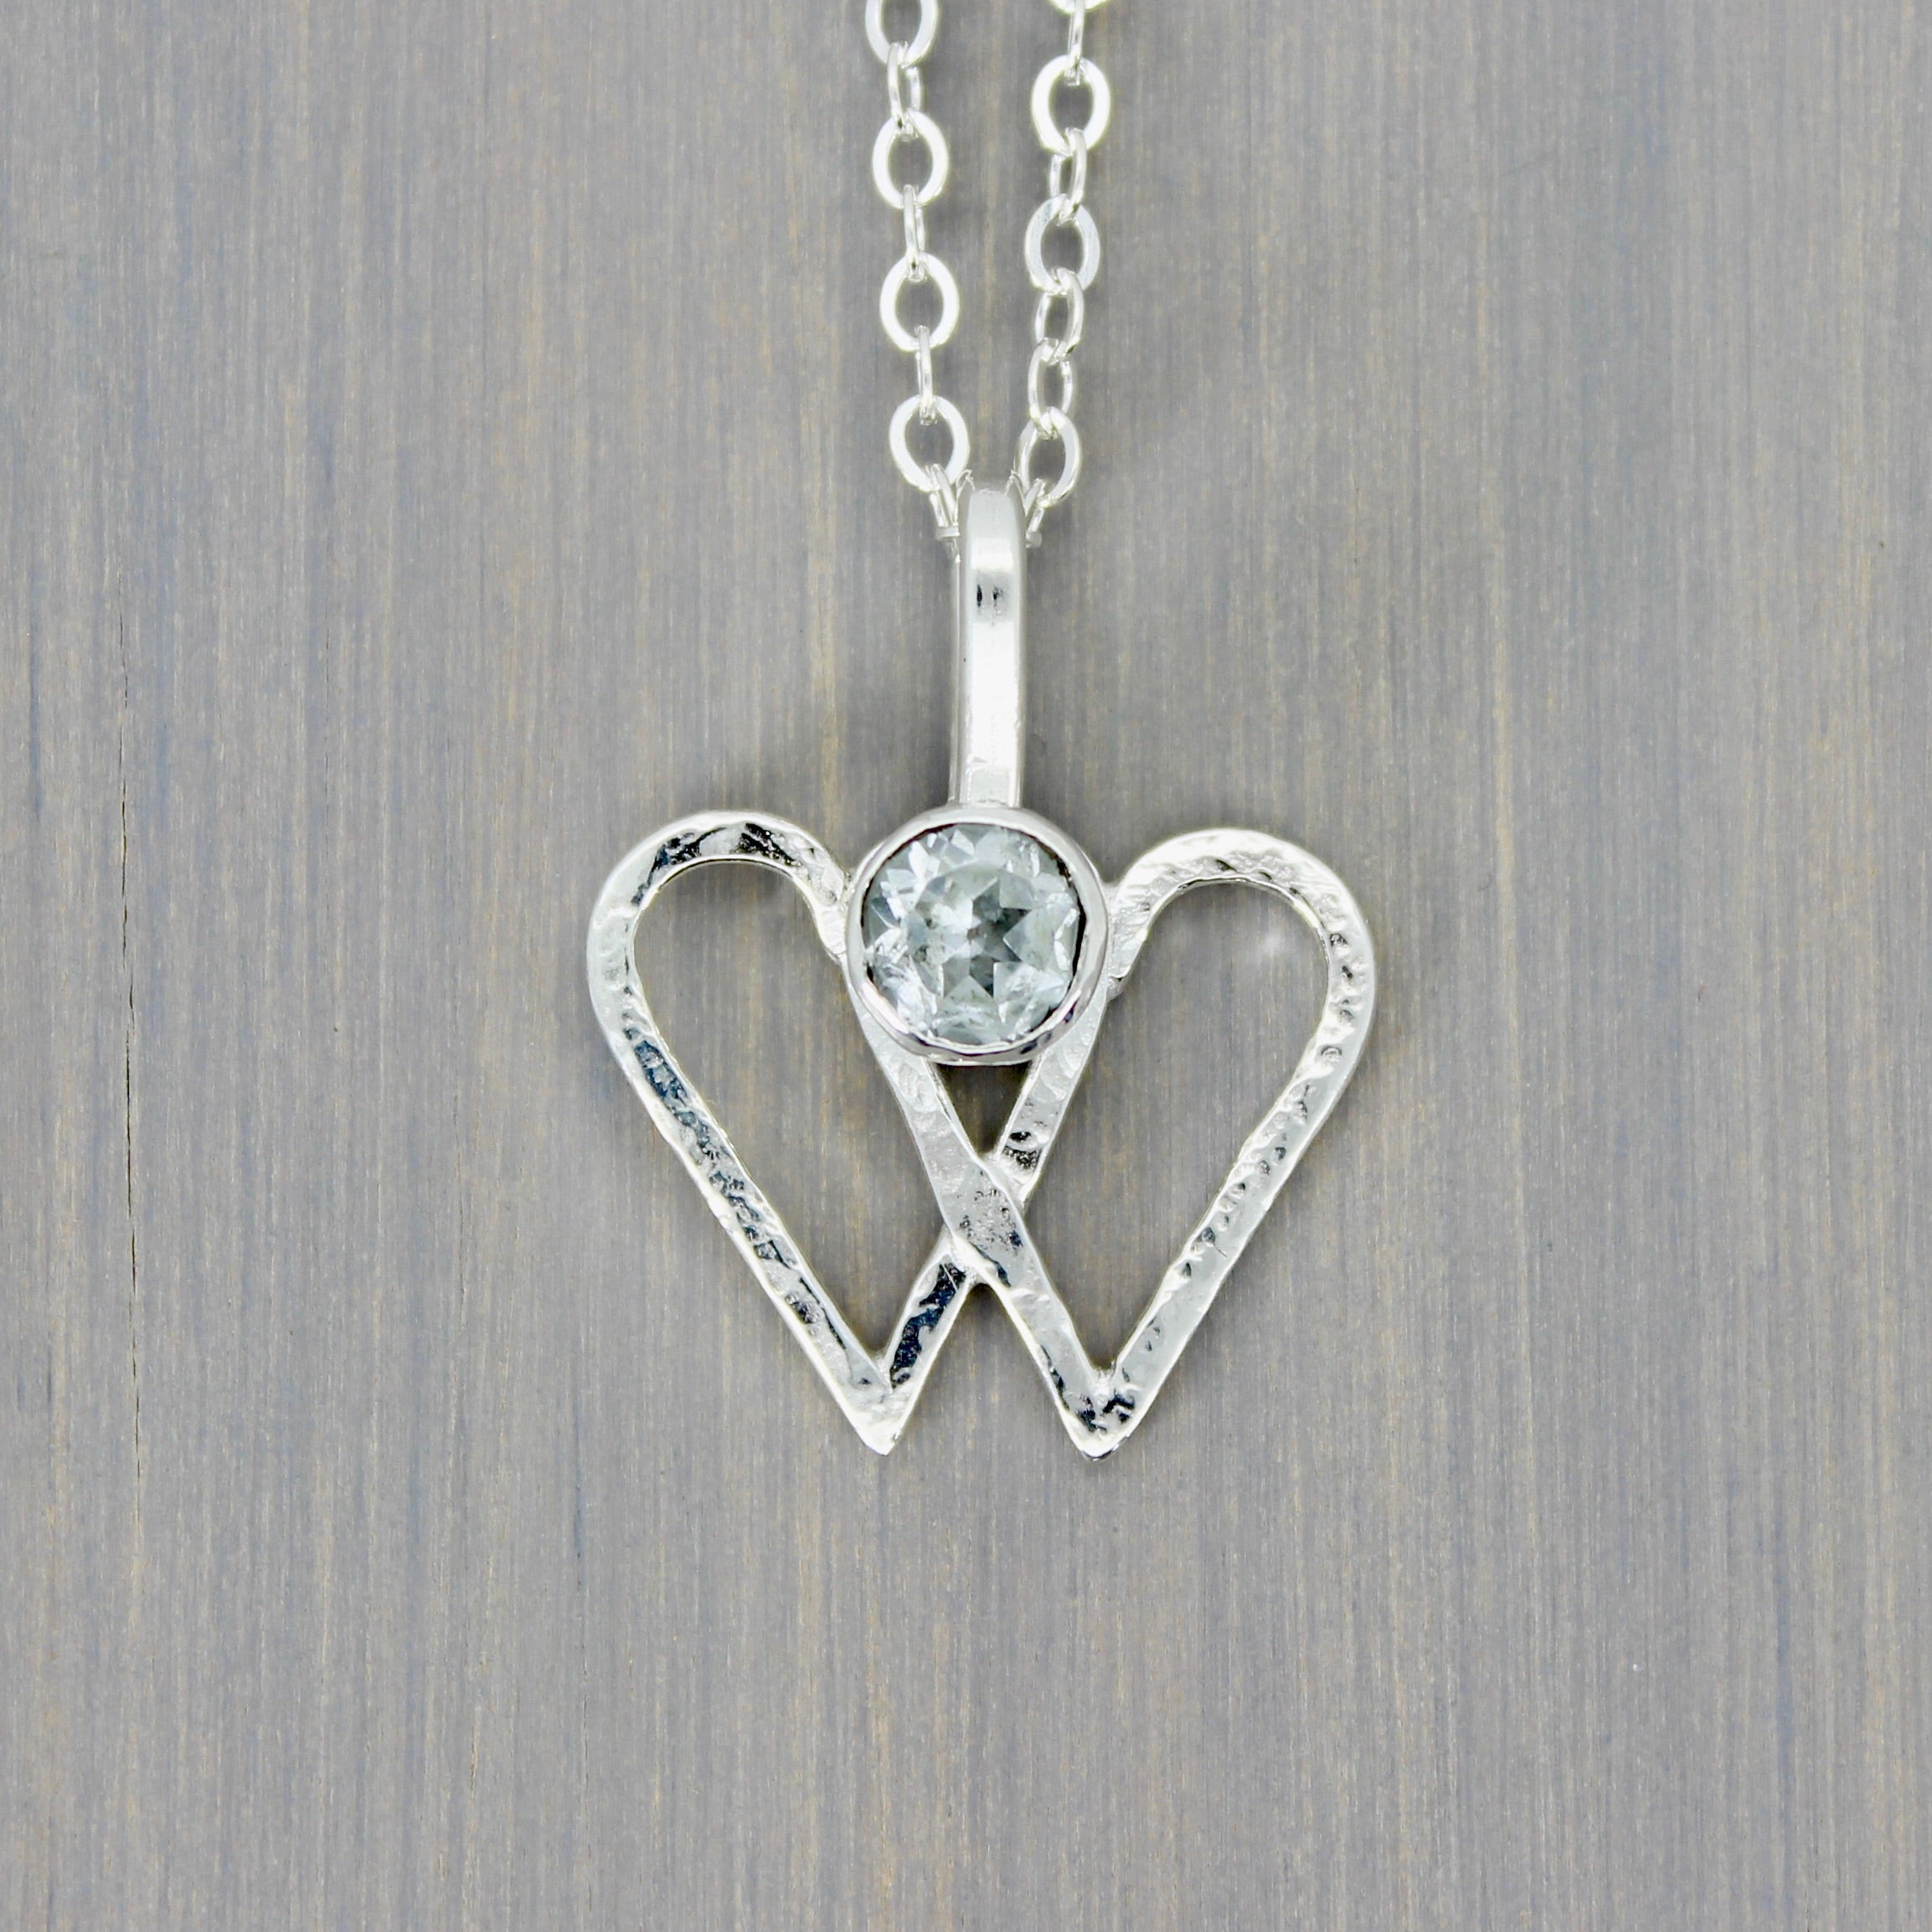 Double Heart Pendant with White Topaz